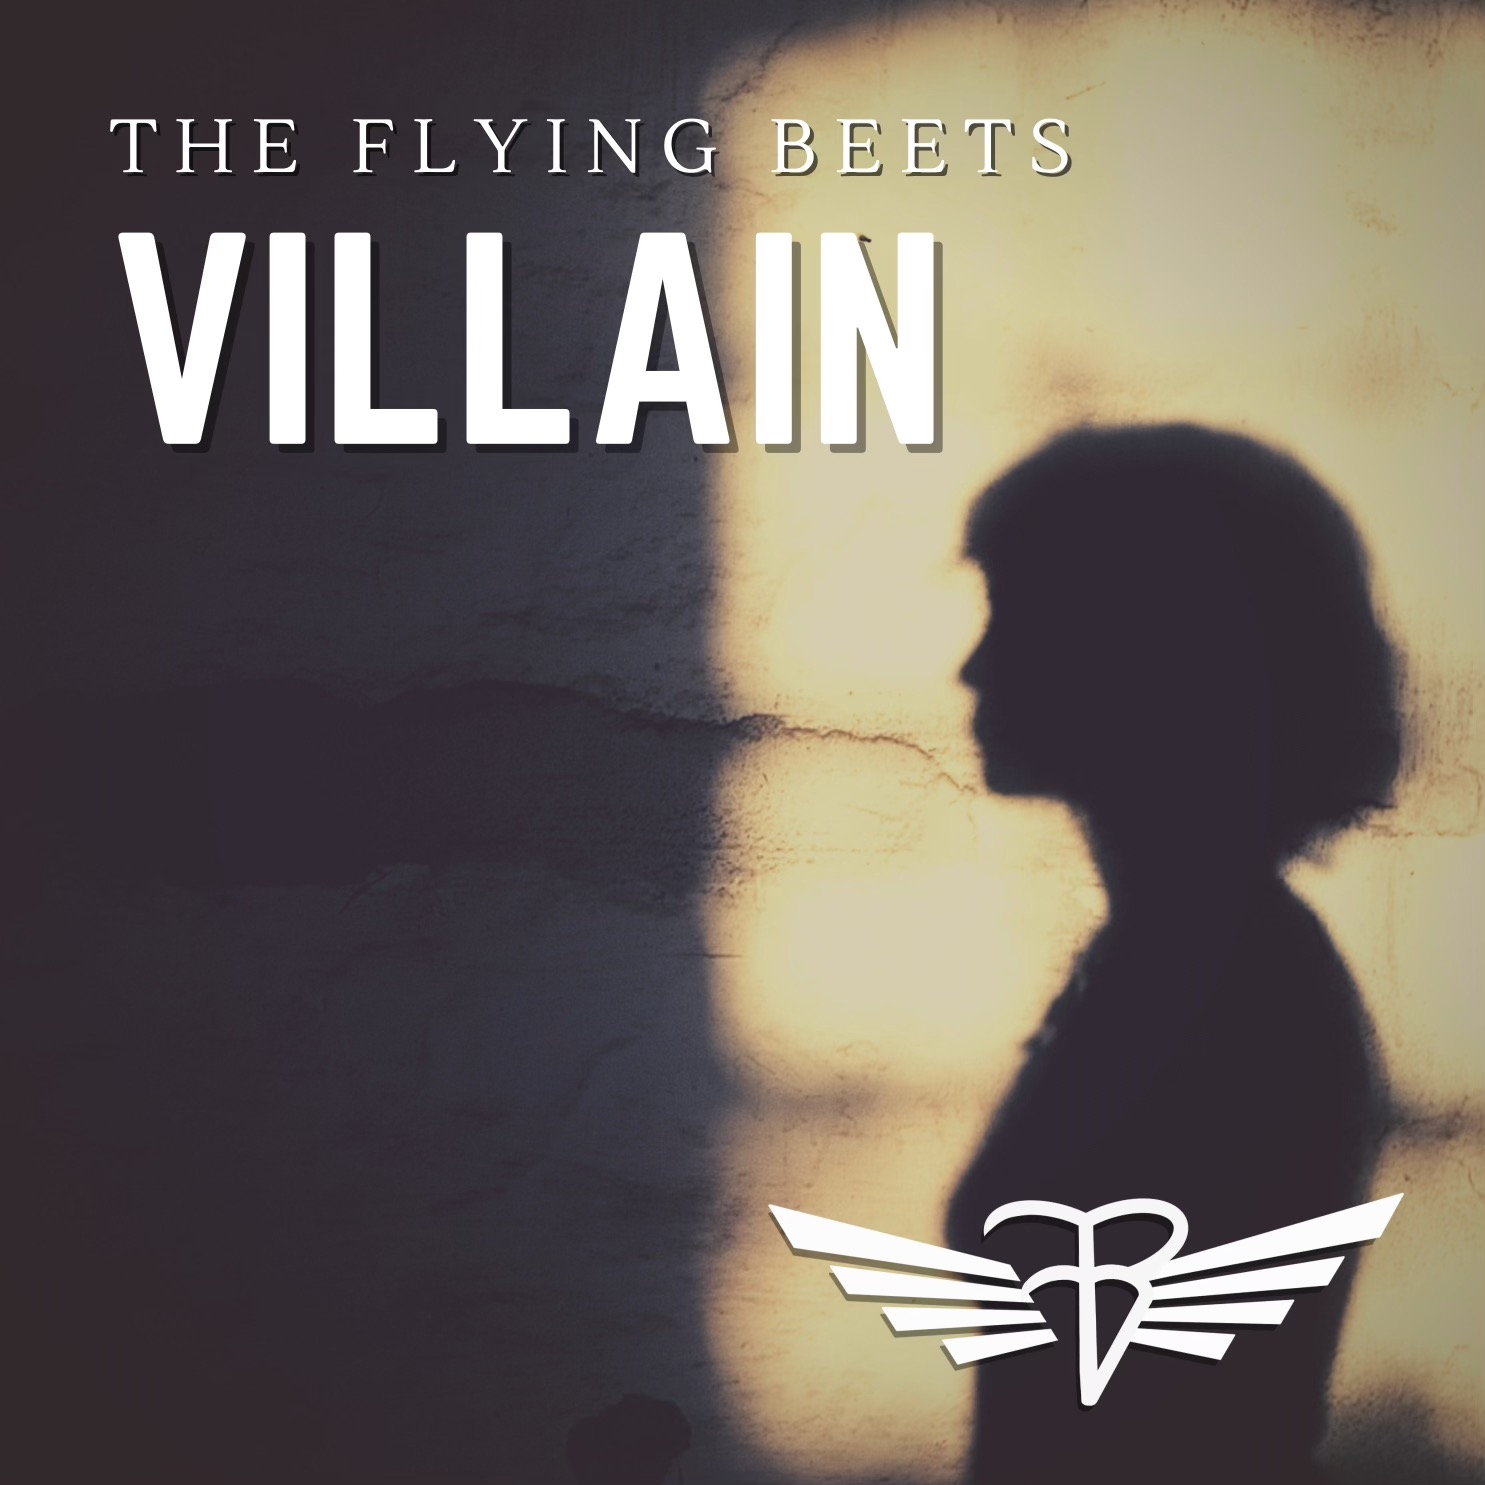 The Flying Beets – “Villain”